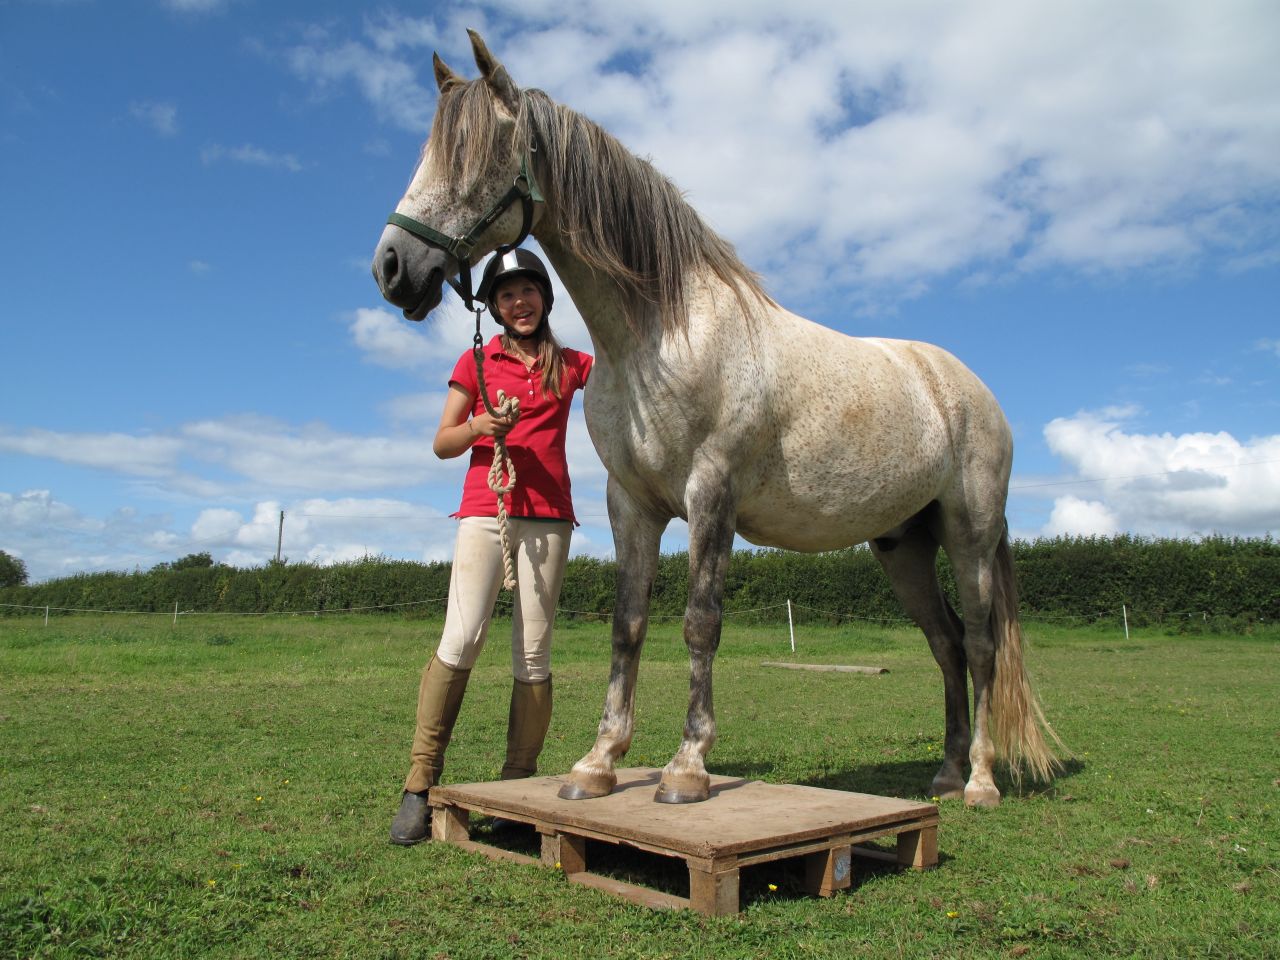 Equine therapy has grown in popularity in the UK in recent years and is now a member of the British Association for Counseling & Psychotherapy (BACP).